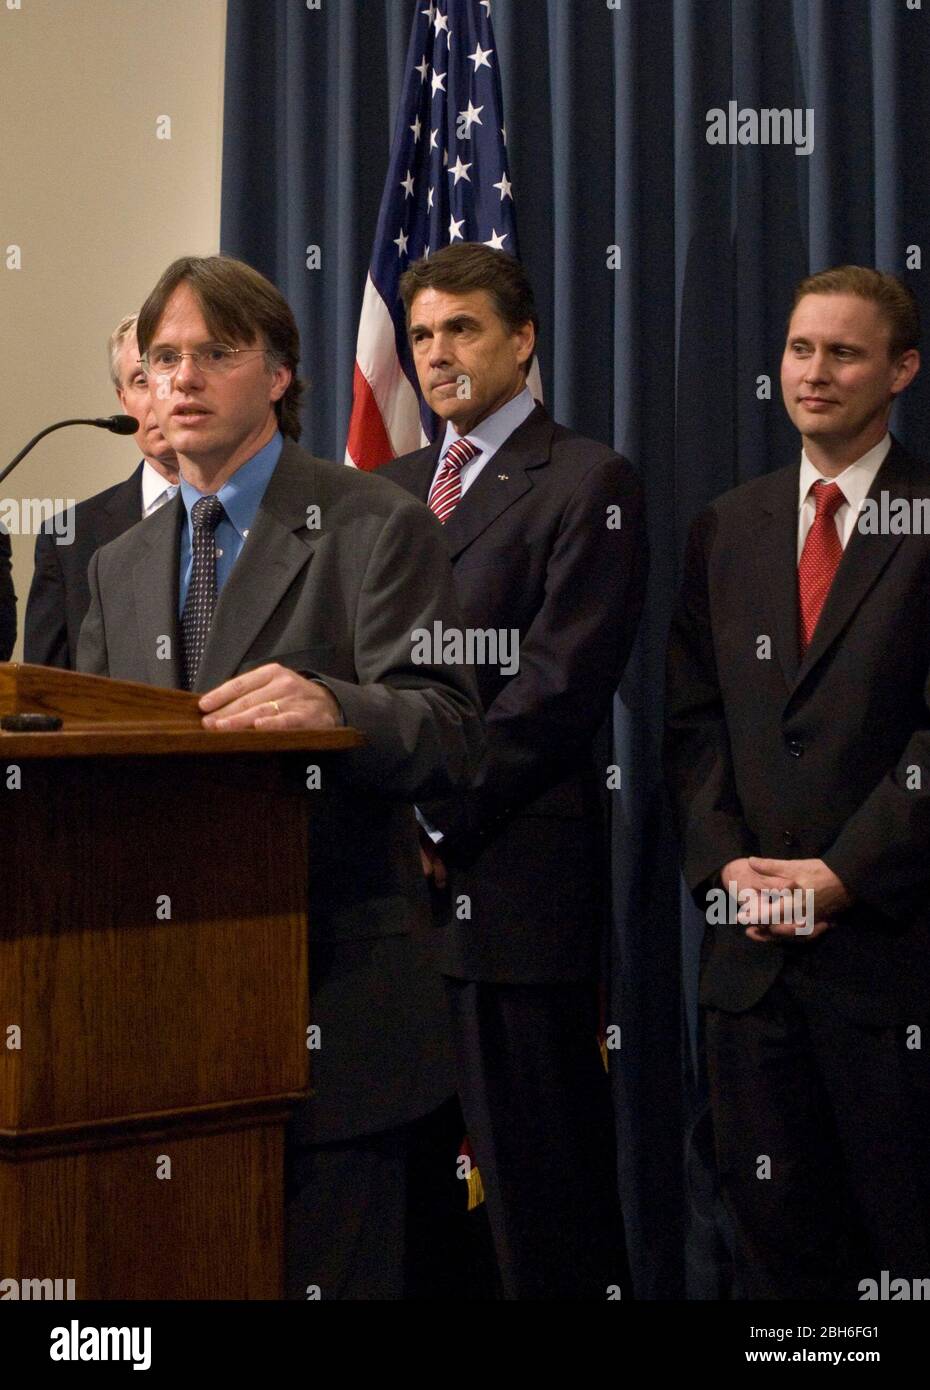 Austin, Texas USA, April 29th, 2009: Dr. David Lakey, Commissioner of the Texas Department of State Health Services, speaks at a press conference o discuss the state's efforts in response to the swine flu. Gov. Rick Perry stands behind Lakey and state education commissioner Robert Scott stands on the right. ©Marjorie Kamys Cotera/Daemmrich Photography Stock Photo